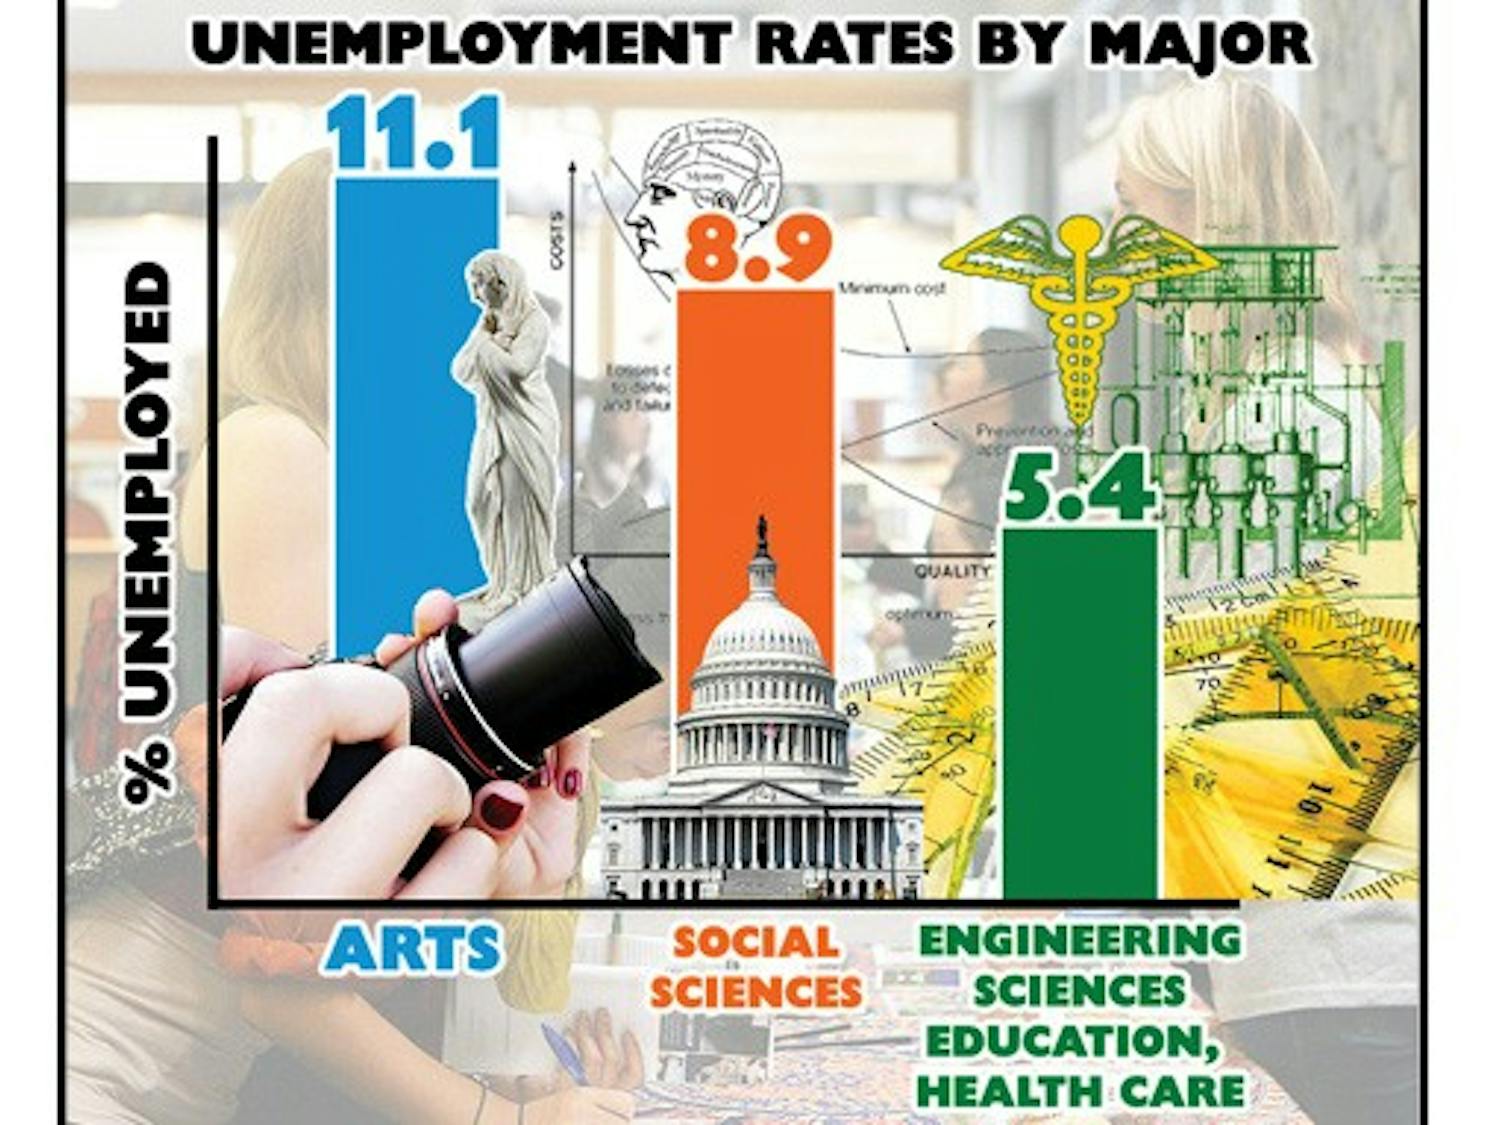 A recent study released in January found that 11.1 percent of non-technical majors were unemployed upon graduation, compared to 8.9 percent of social sciences majors and 5.4 percent of engineering, sciences, education or health care majors.